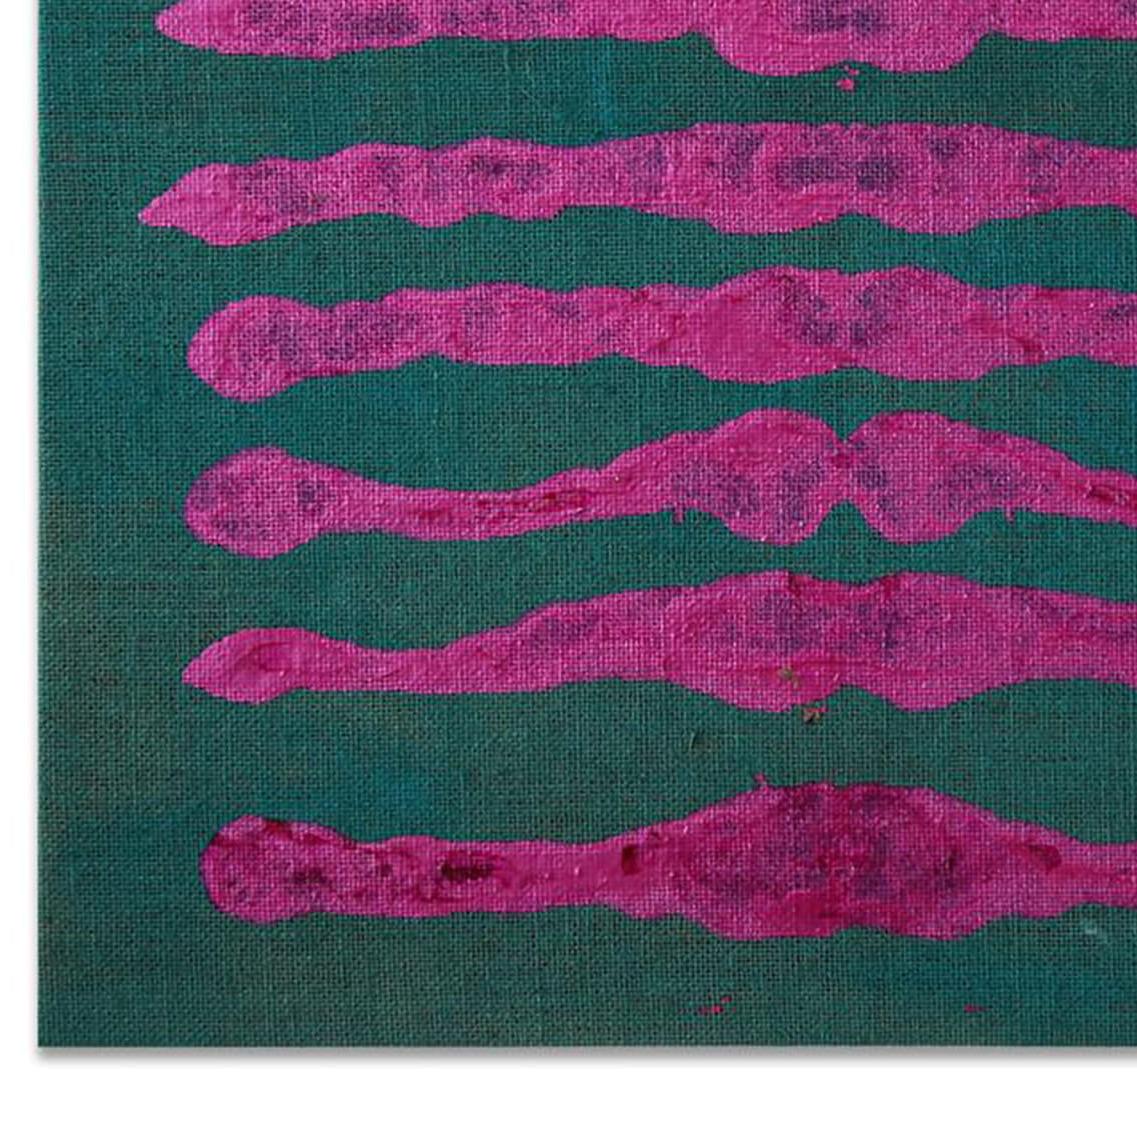 Kim Fonder, DZOGCHEN SERIES I, Size is Unframed, Mixed Media on Burlap, 31.00 X 28.50 in, $1,600.00, Green, Pink, Abstract, contemporary, mixed media, fine art

Kim Fonder loves texture and touch. Her paintings and furniture reflect her infatuation